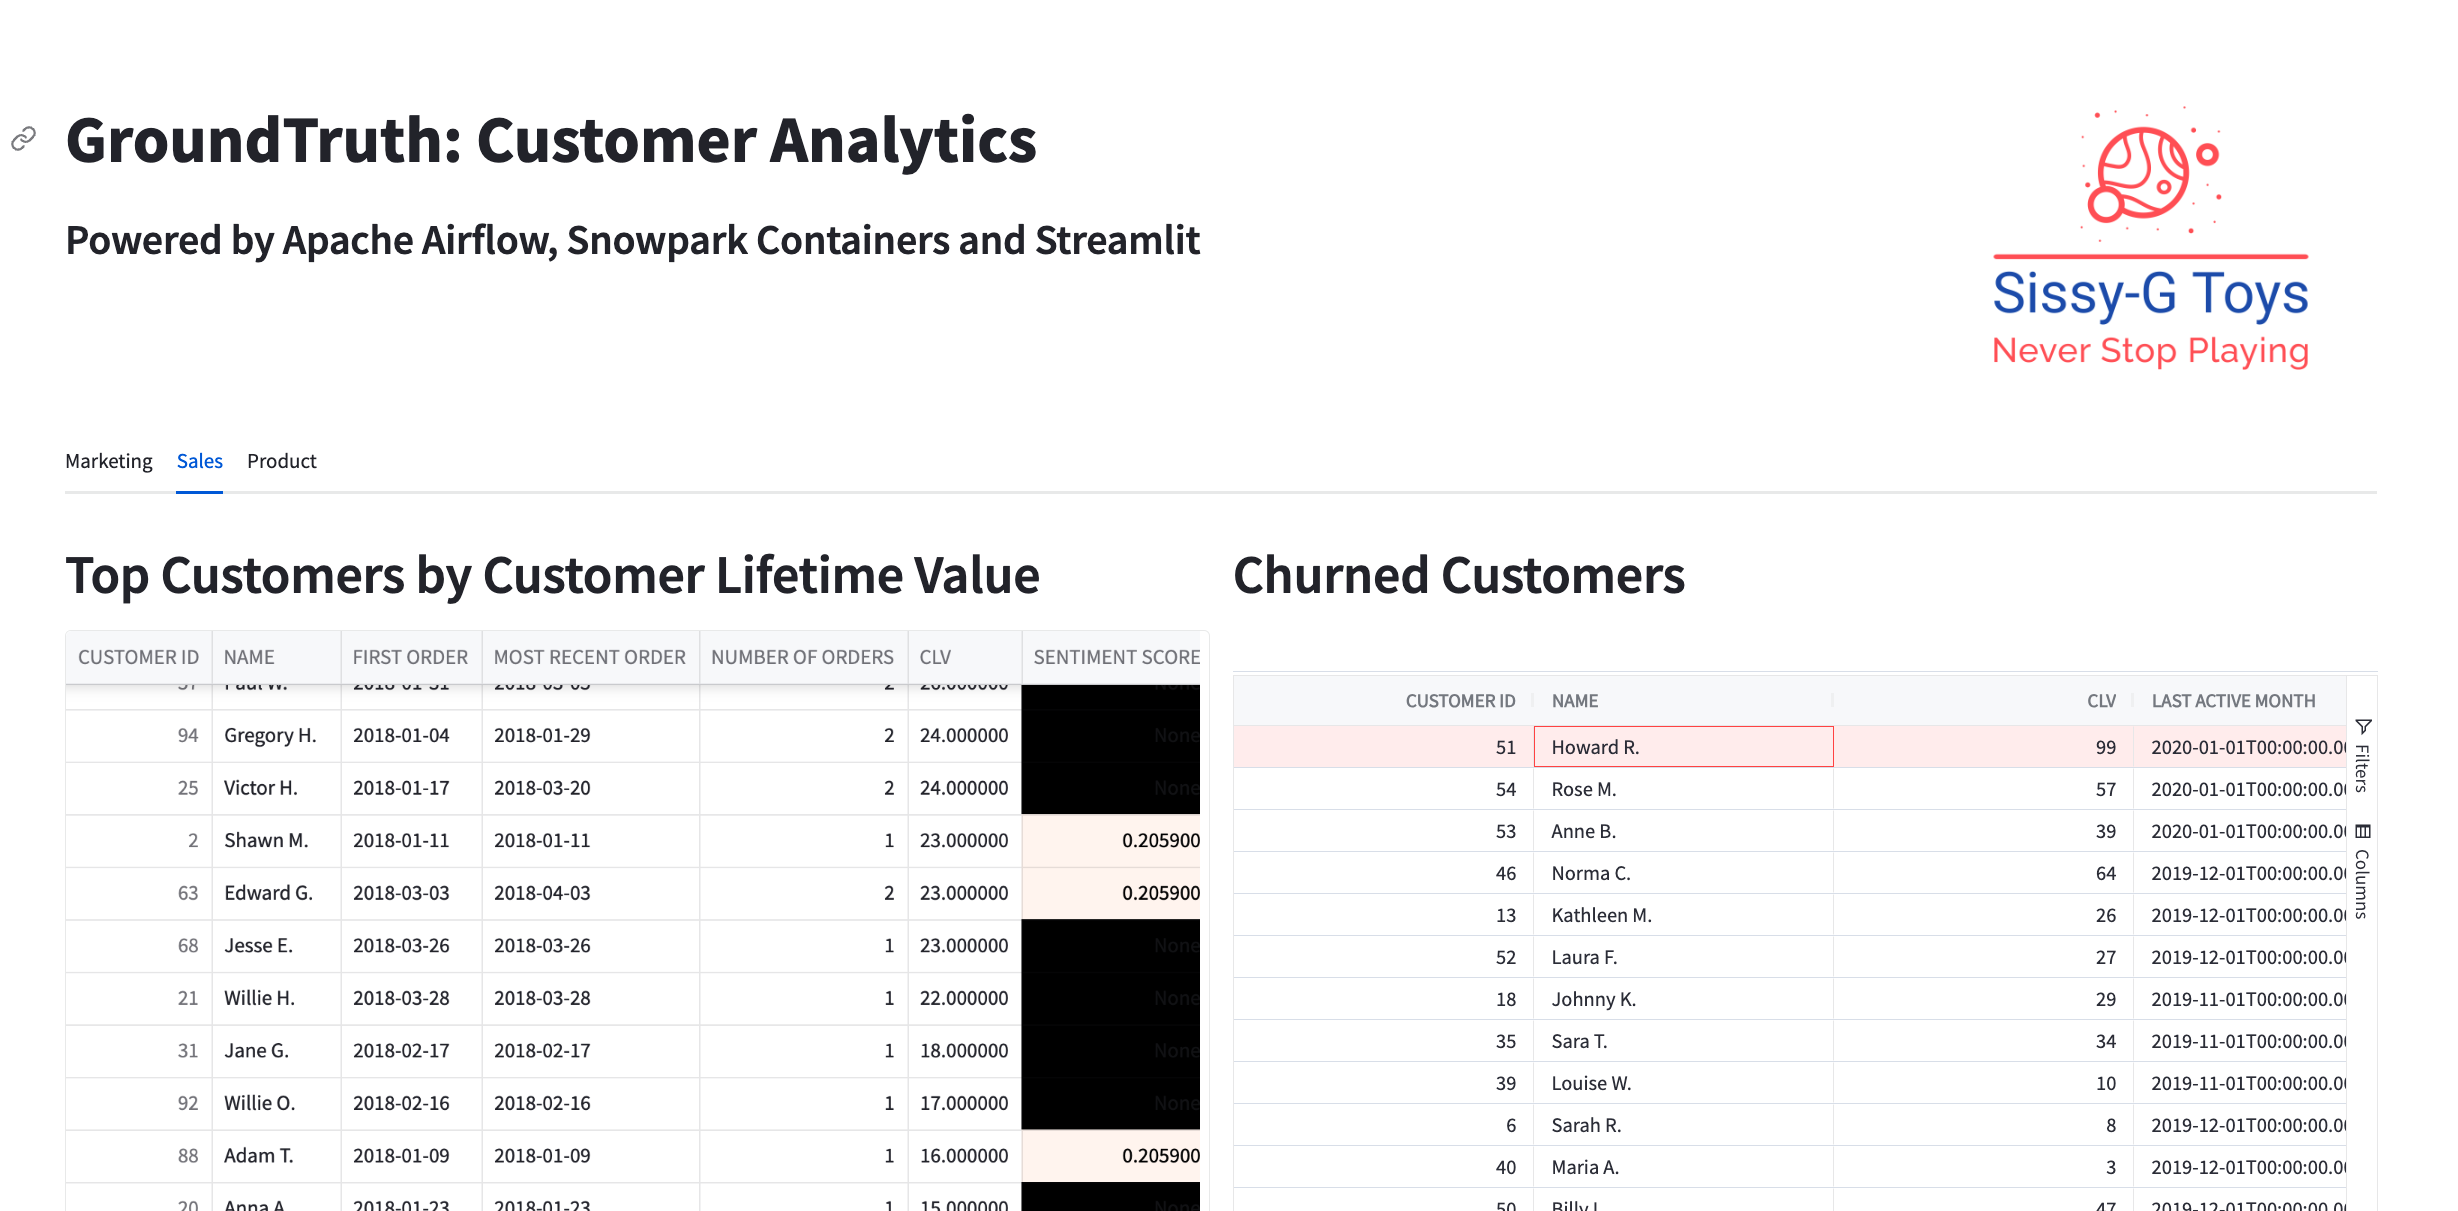 A screenshot of the streamlit application created in this use case that shows the customer analytics dashboard